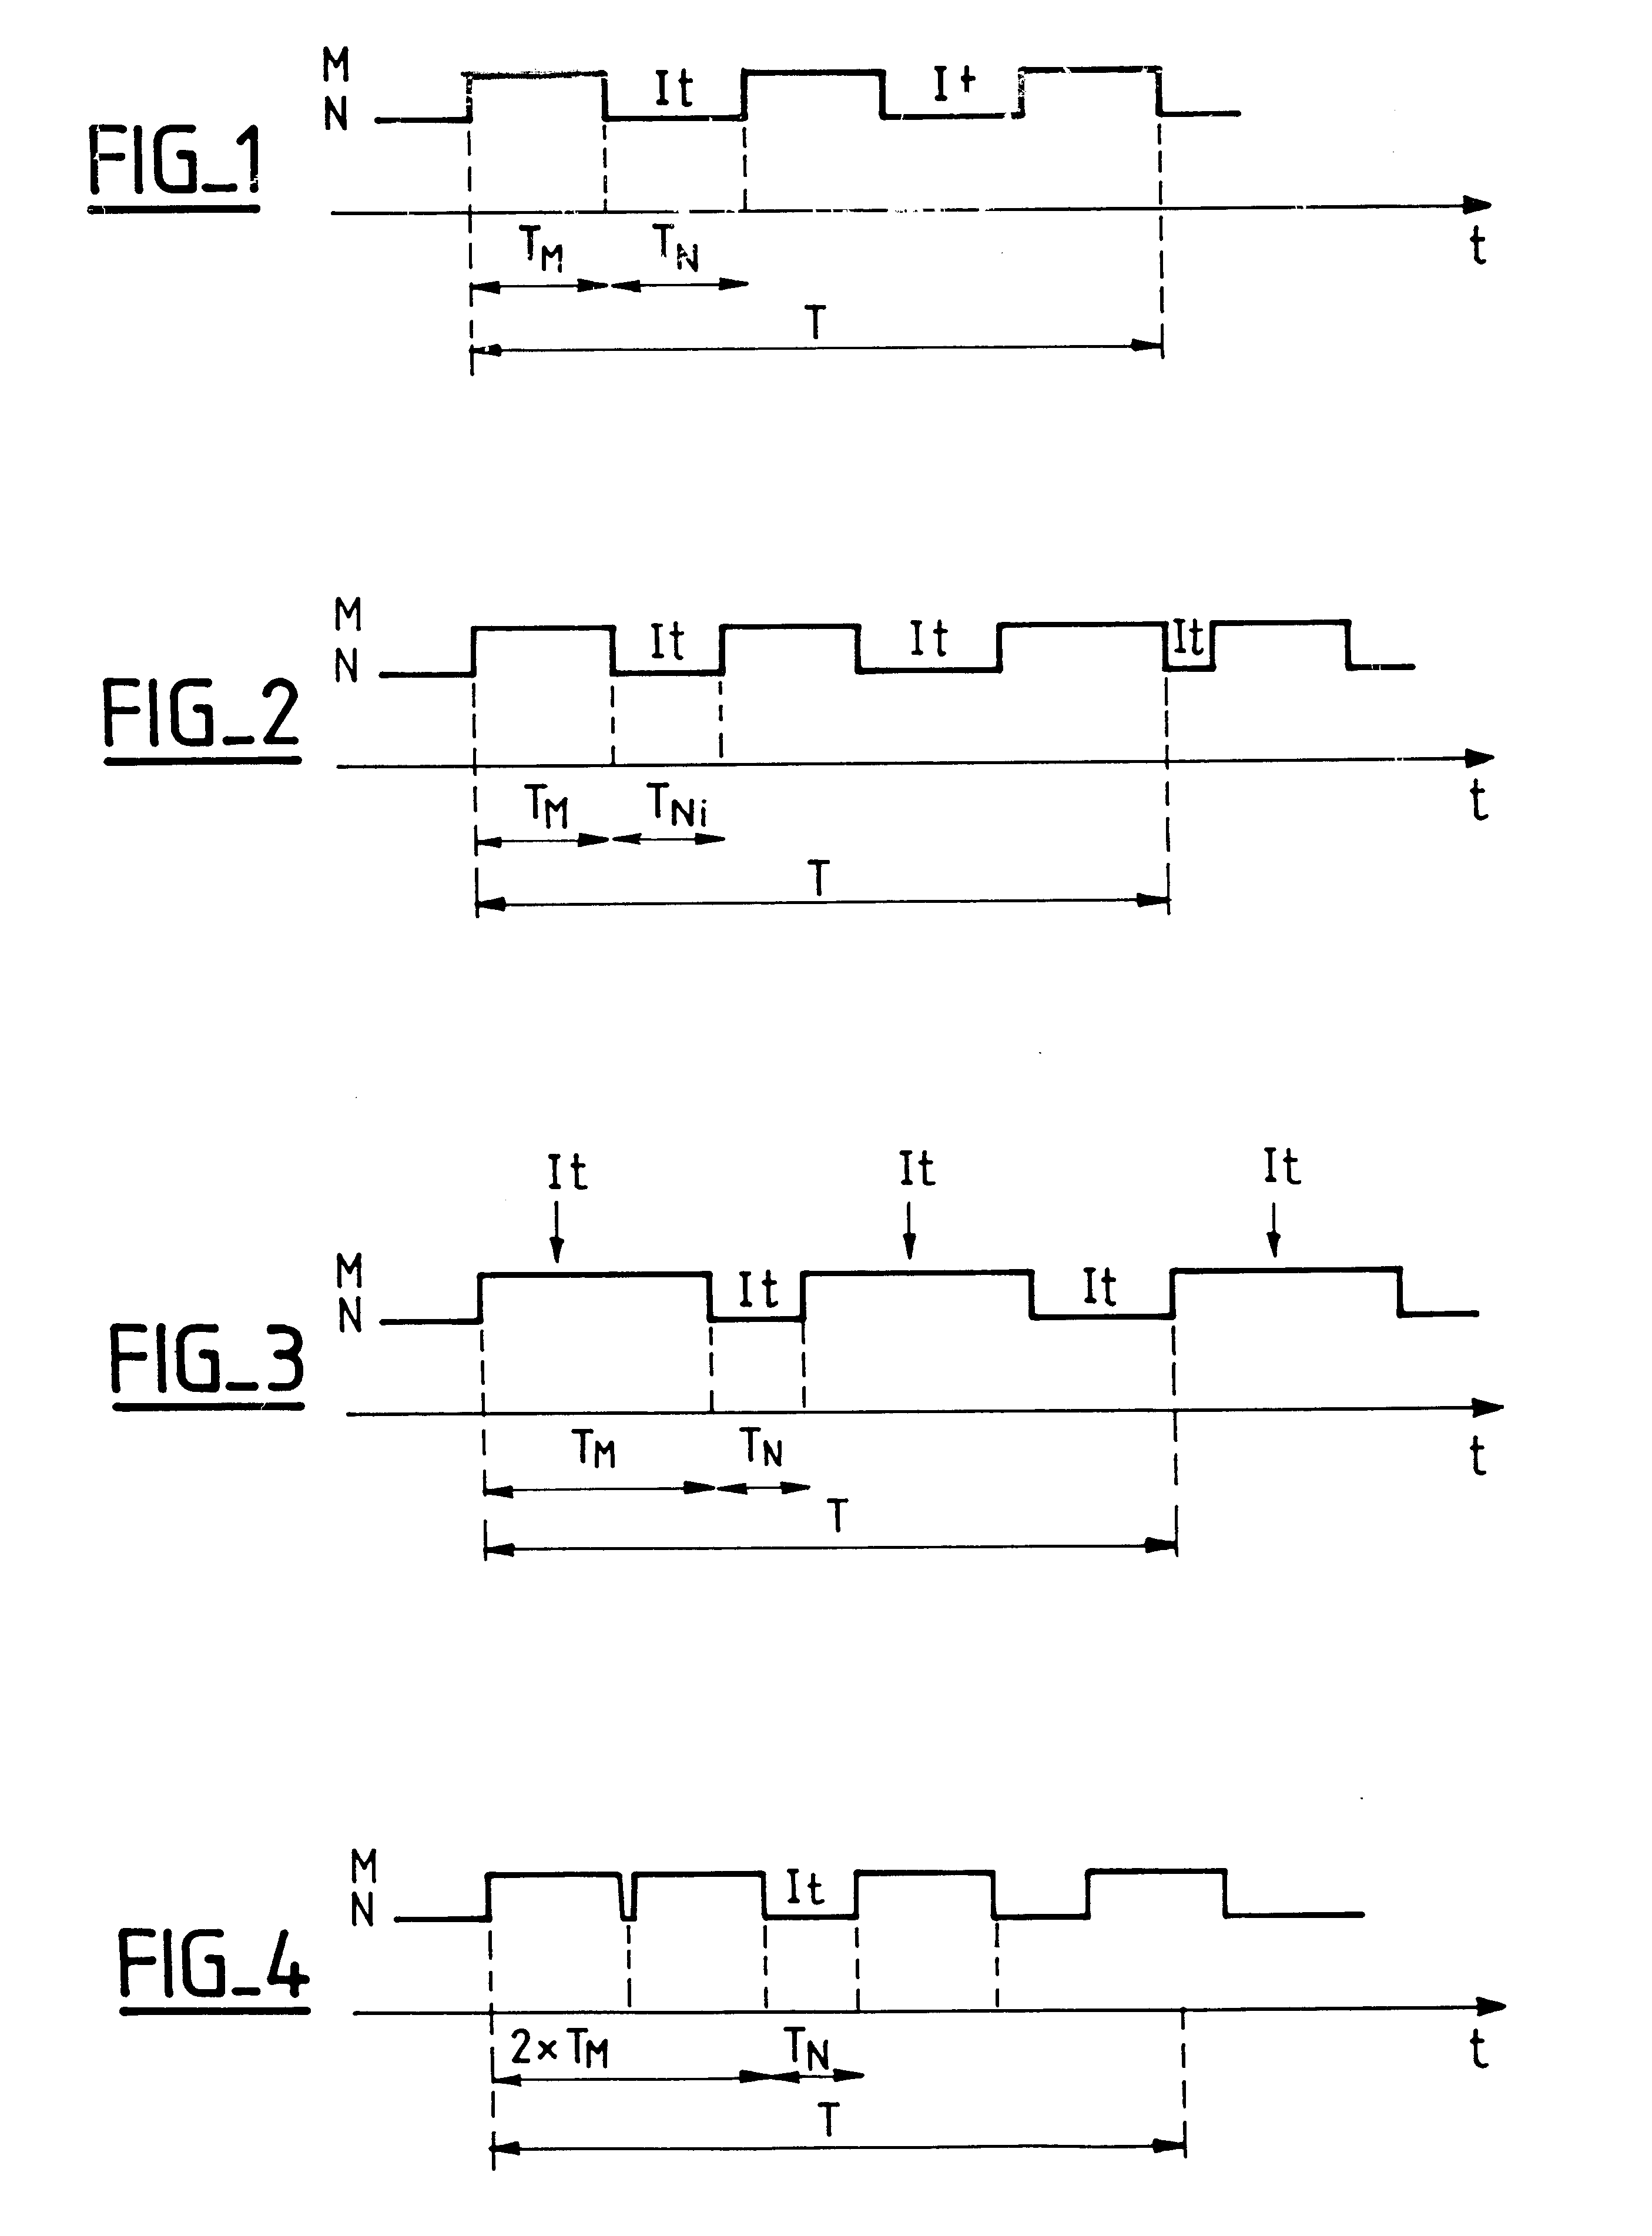 Method of performing a task in real time by a digital signal processor